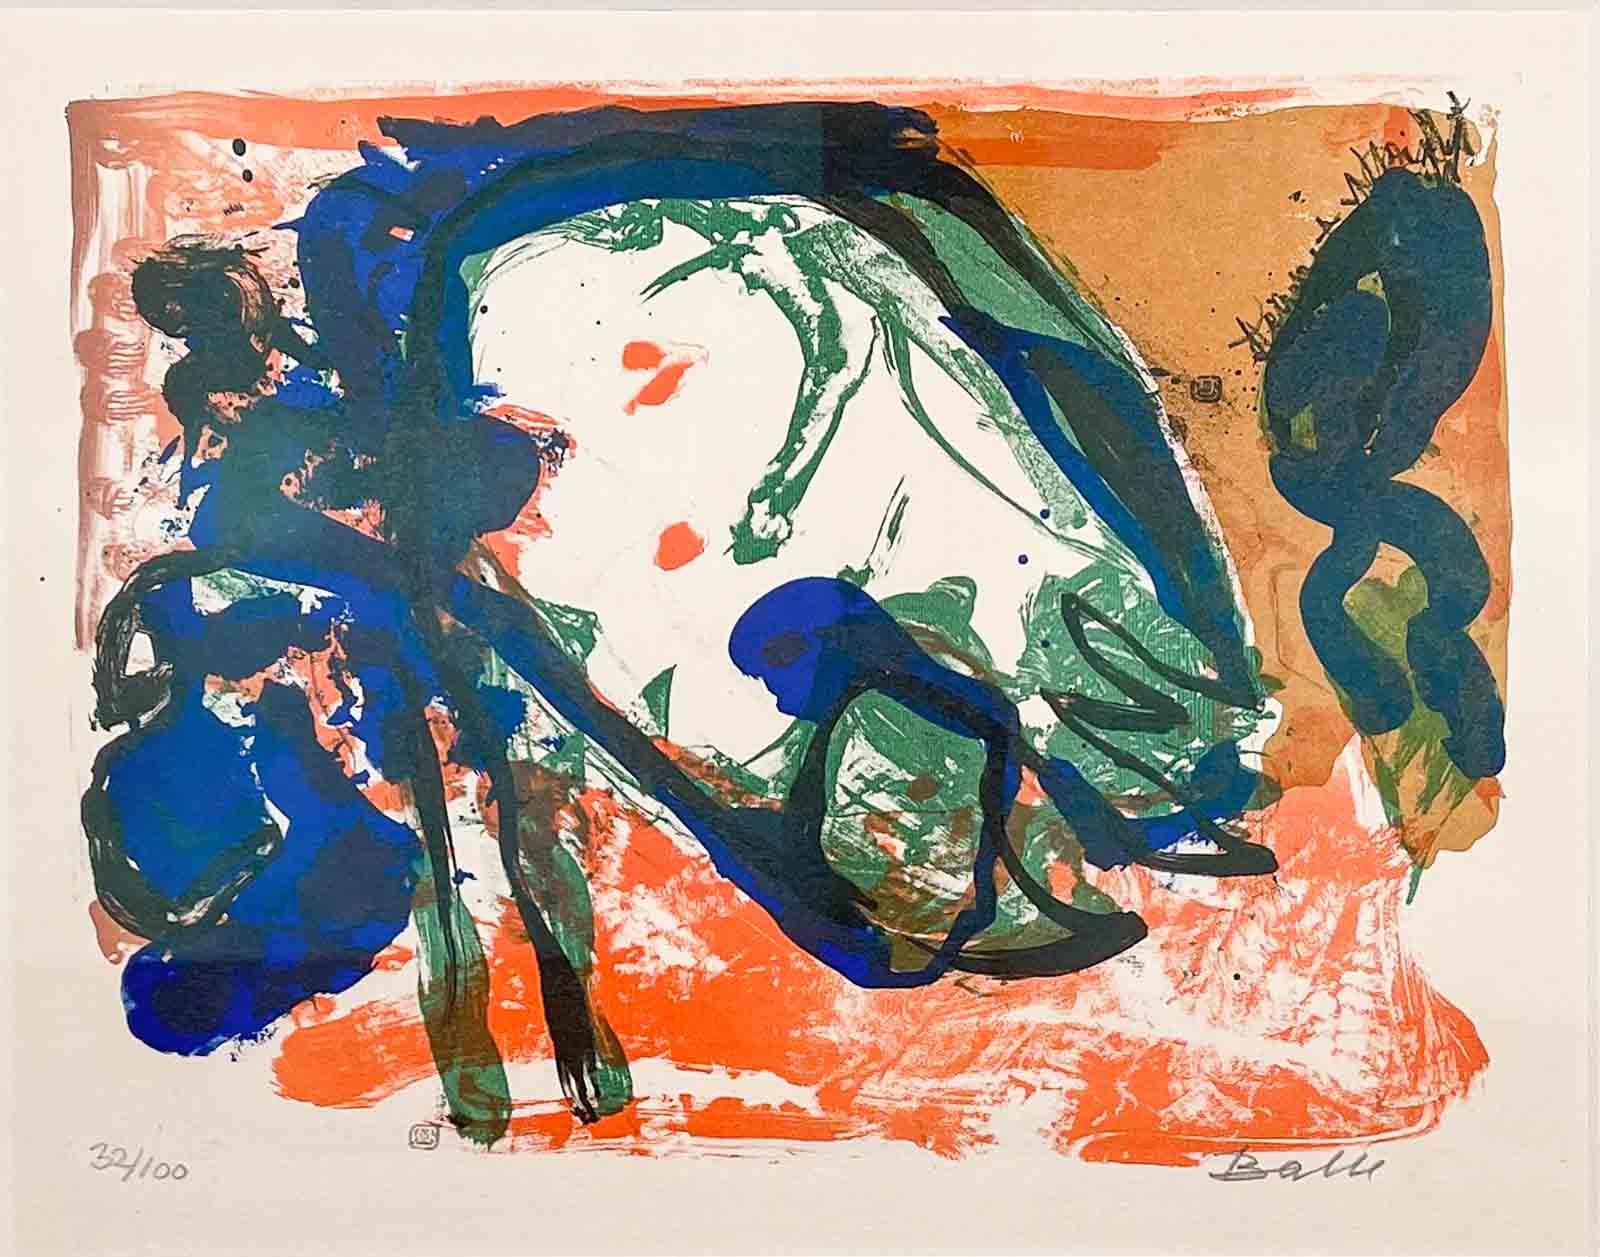 Mogens Balle – Abstract composition, lithograph on Arches paper 1967 – framed, museumglass